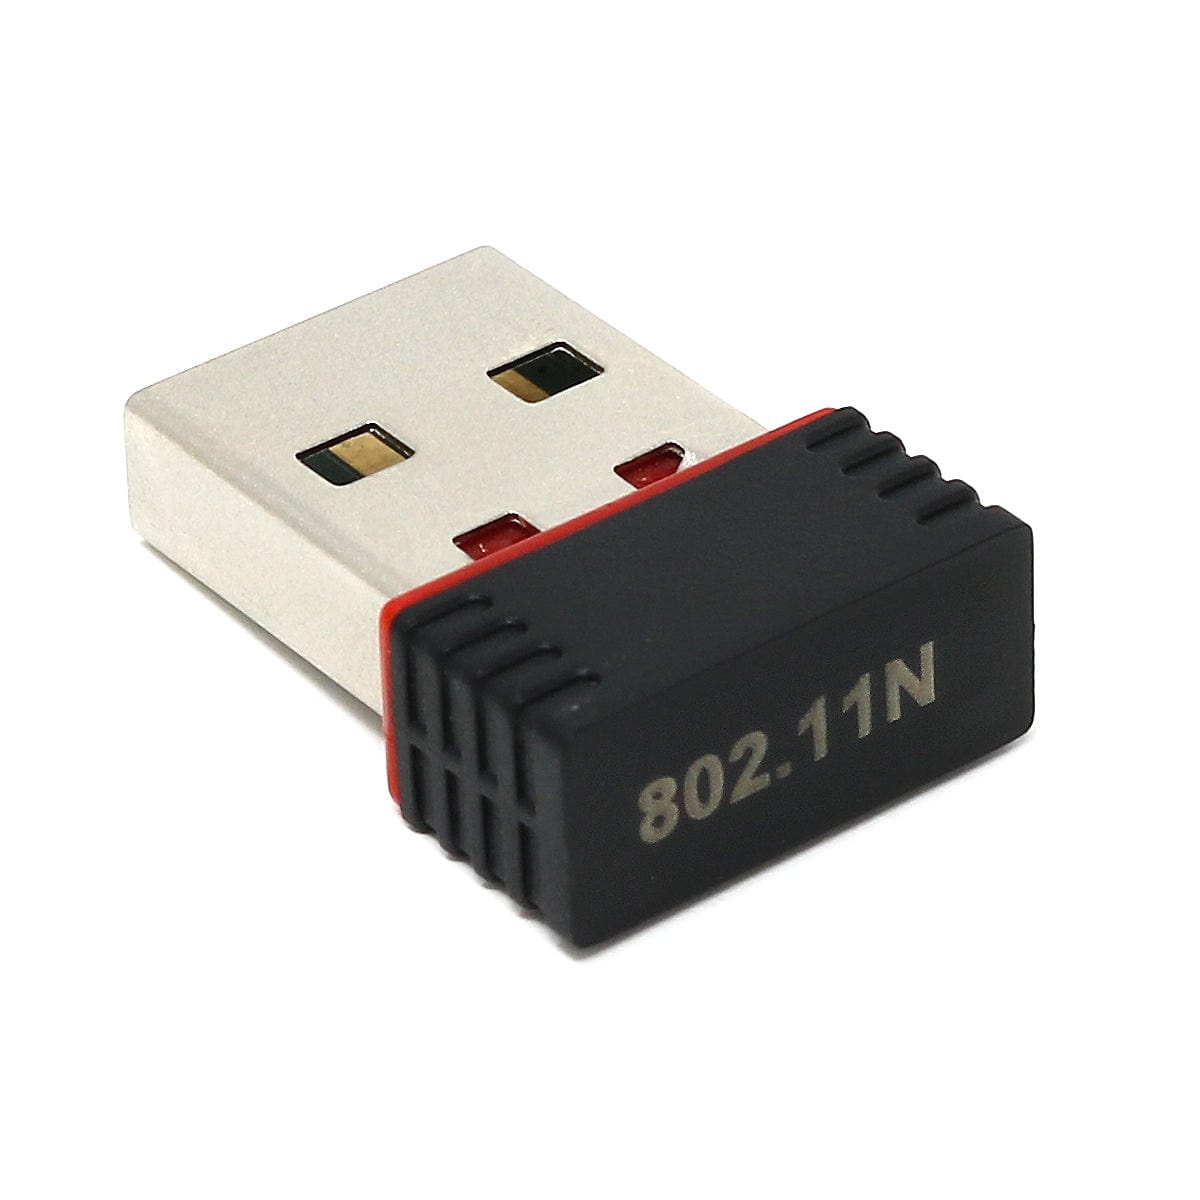 USB WiFi (802.11b/g/n) Module: For Raspberry Pi and more : ID 1012 : $13.95  : Adafruit Industries, Unique & fun DIY electronics and kits